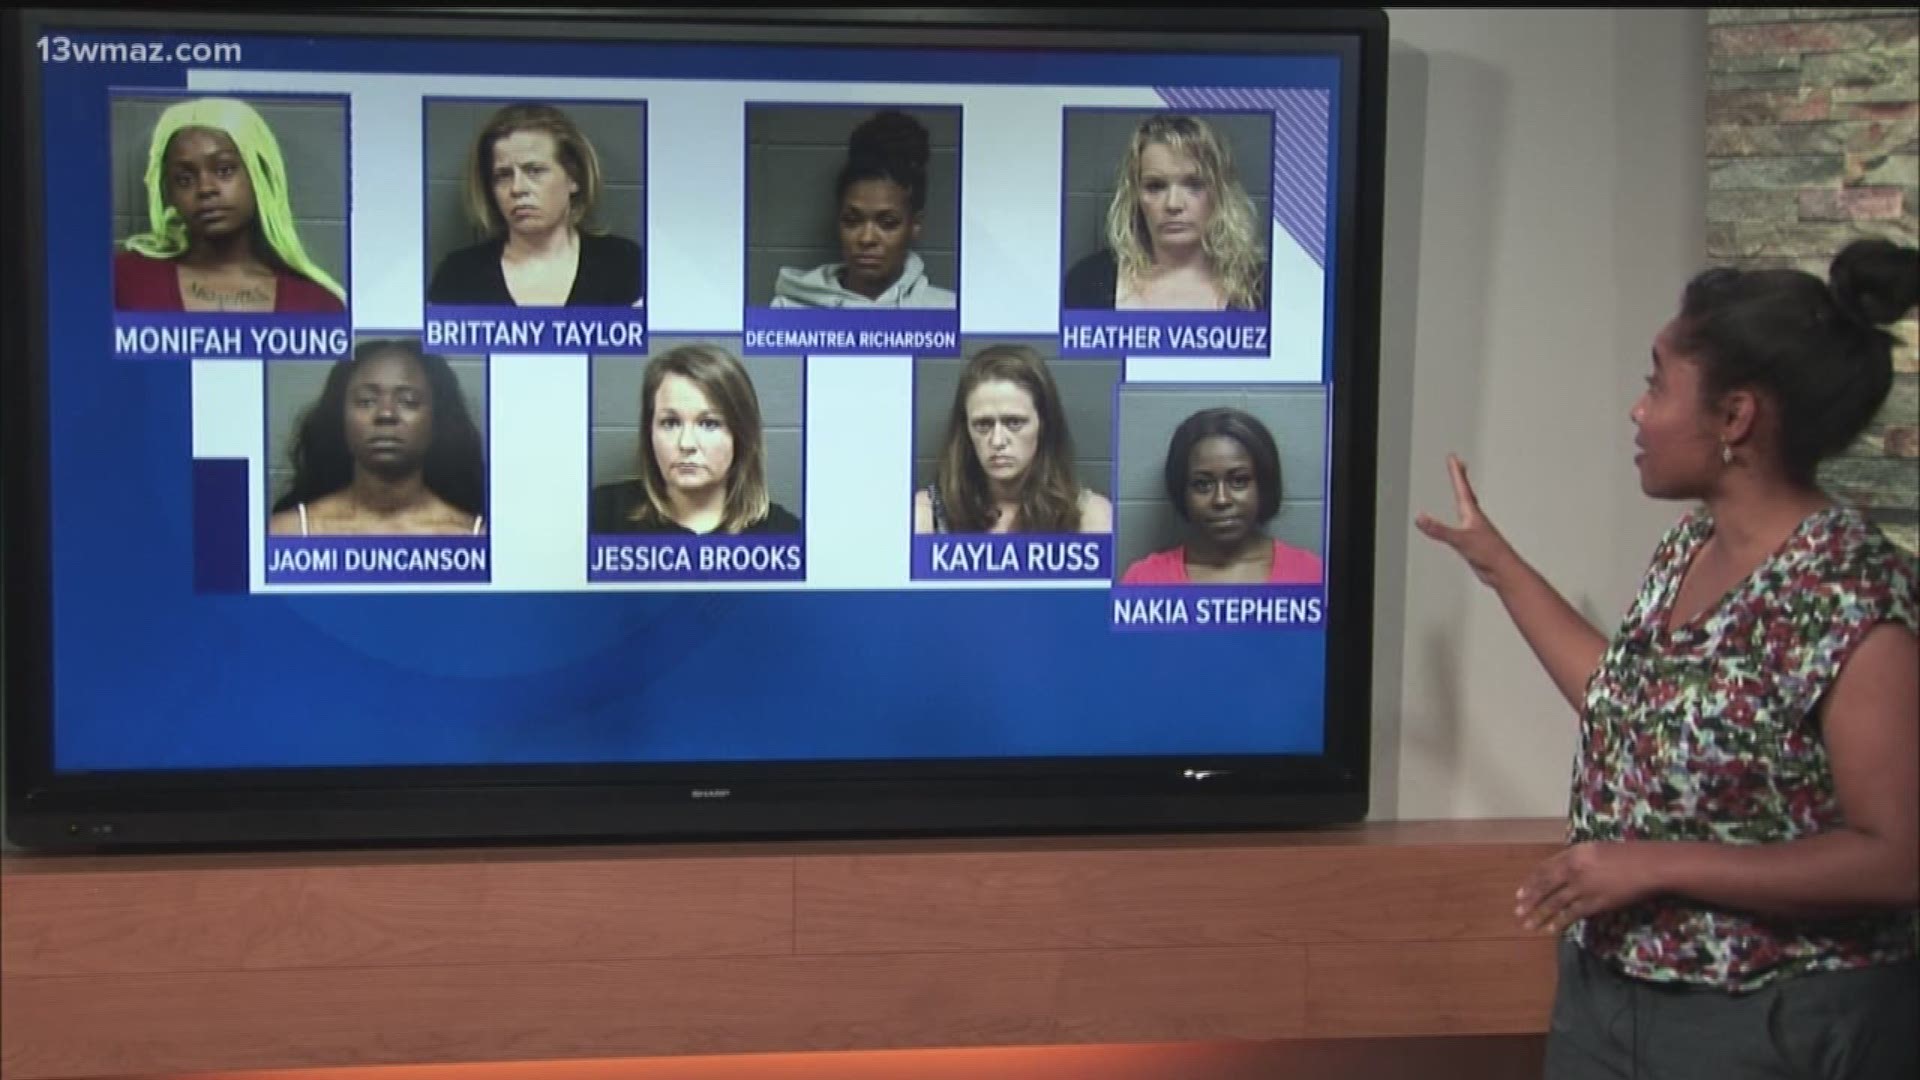 Warner Robins police say they've arrested 8 women for prostitution and other charges. Captain Chris Rooks with Warner Robins Police Department says the investigation started when undercover officers saw sex ads online, and it ended with the arrests of 8 women.